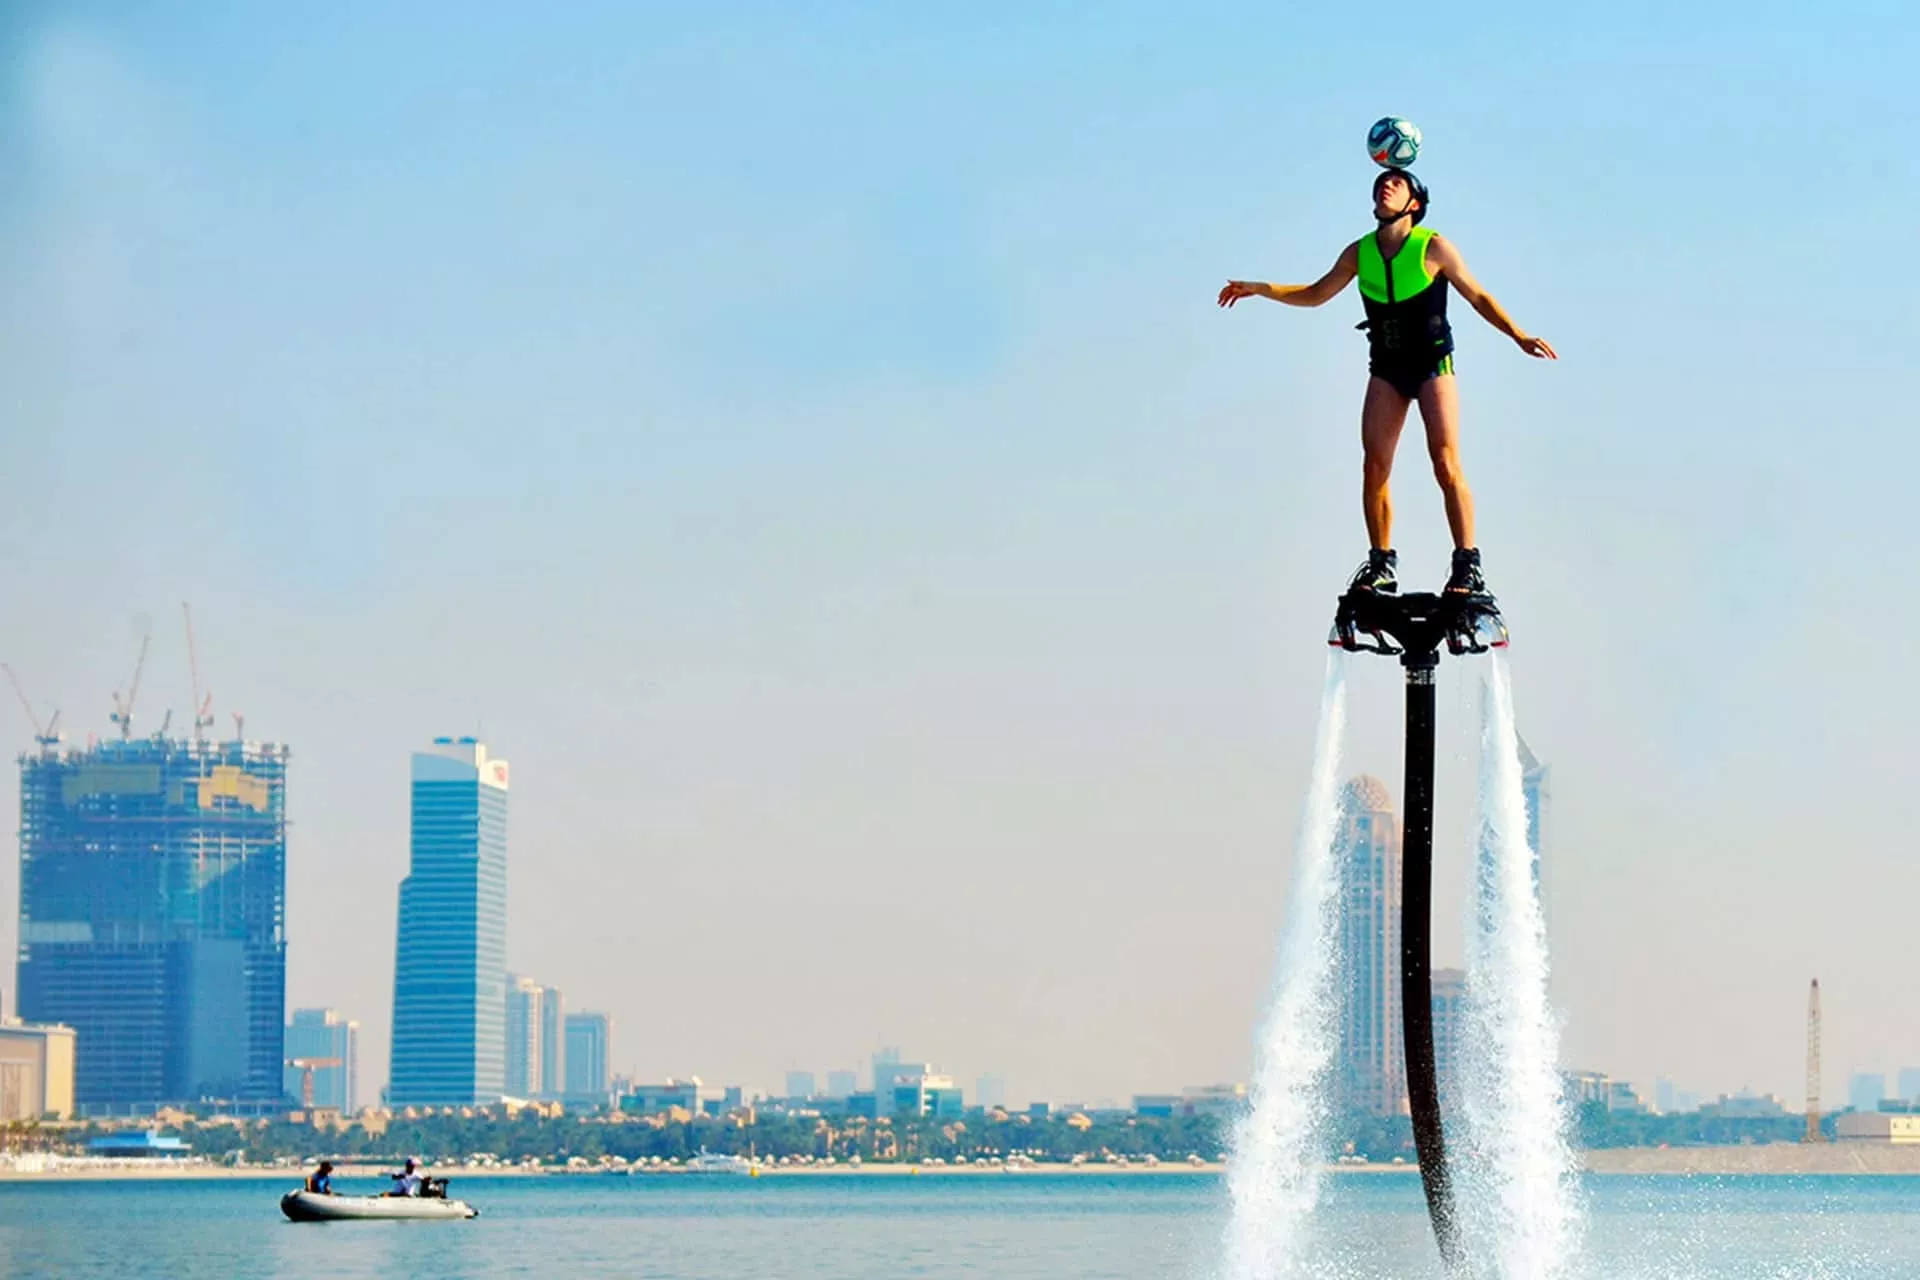 iFlyboard Seattle in USA, North America | Flyboarding - Rated 1